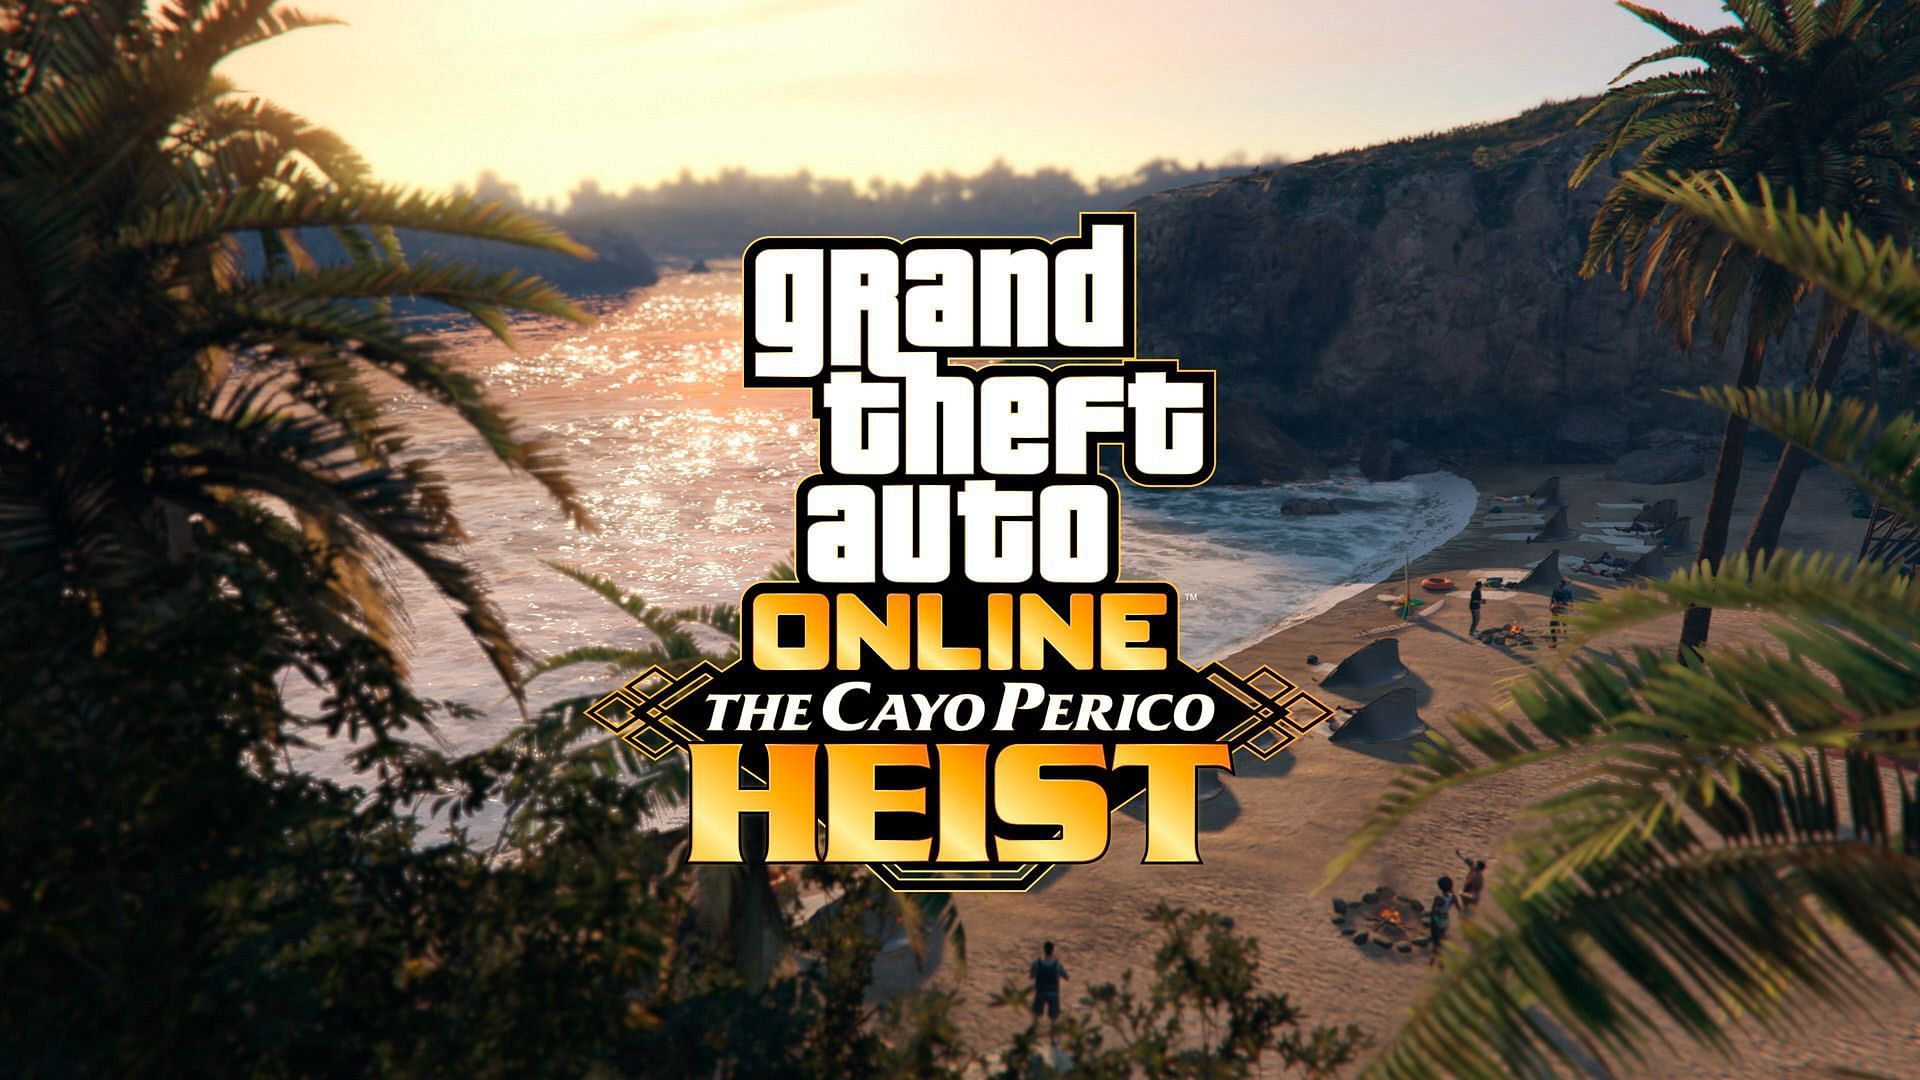 GTA Online Cayo Perico Heist gets nerfed in the game's 10th anniversary  week event